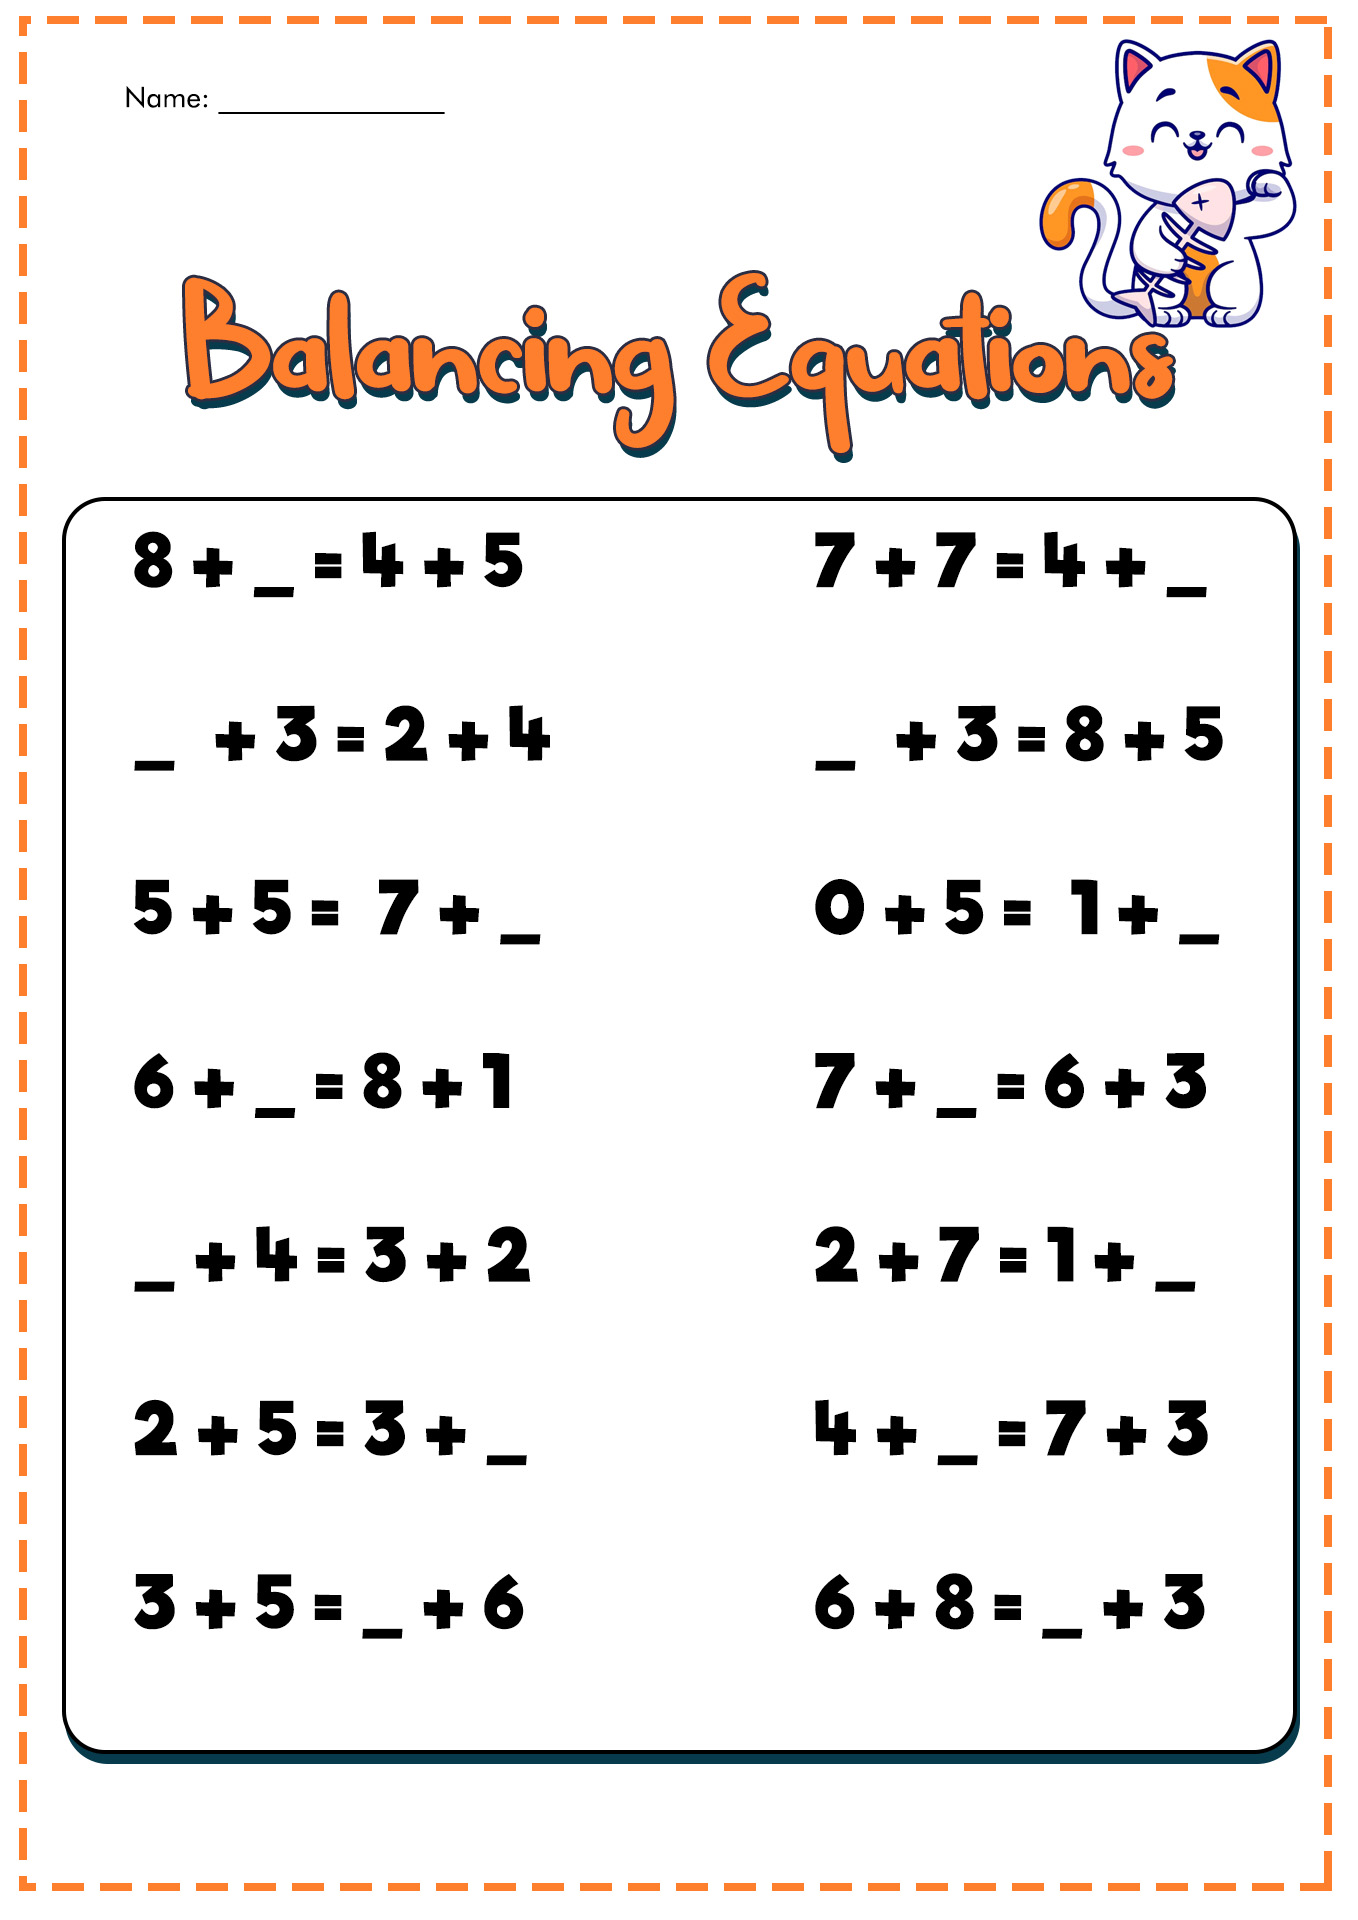 4th-grade-math-practice-multiples-factors-and-inequalities-4th-grade